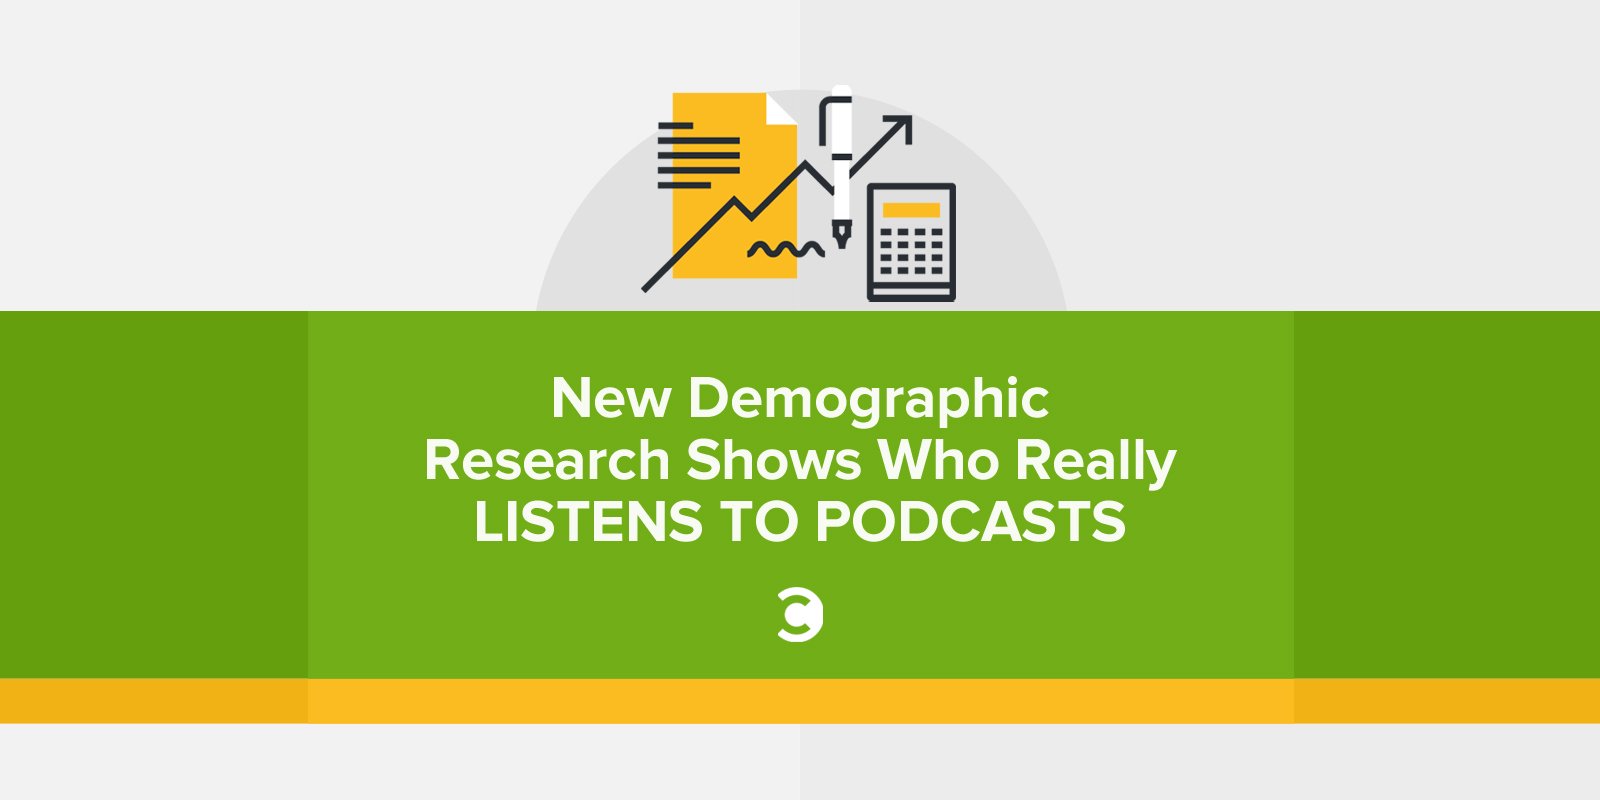 New Demographic Research Shows Who Really Listens to Podcasts